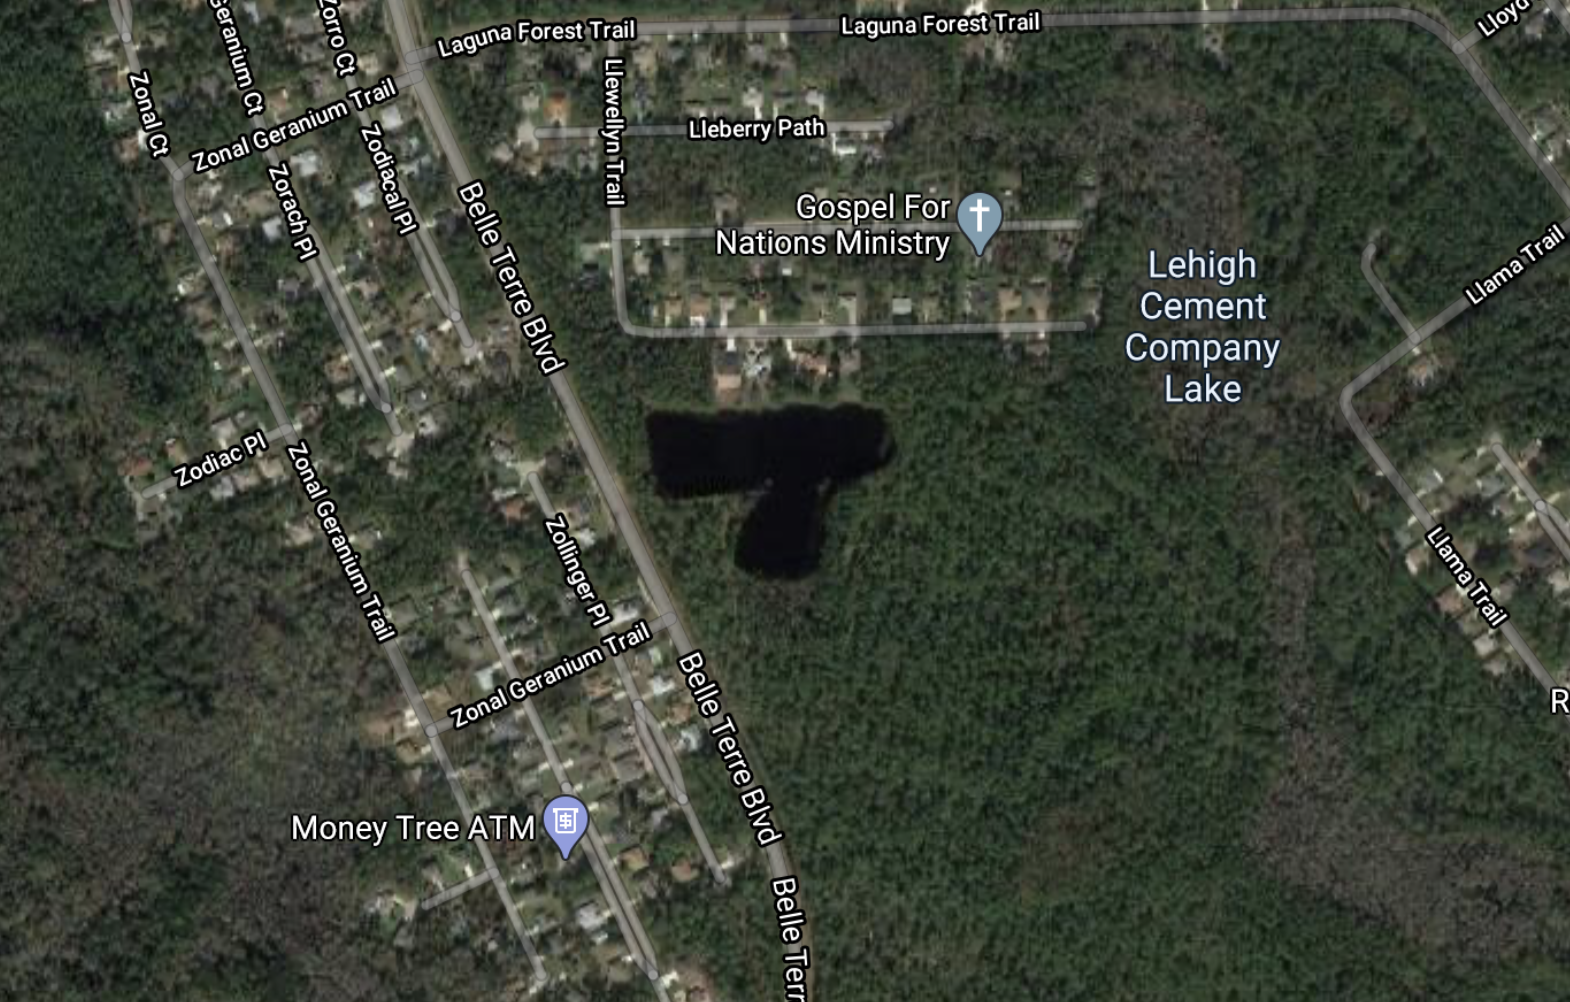 The lake east of Belle Terre Boulevard. Image from Google Maps